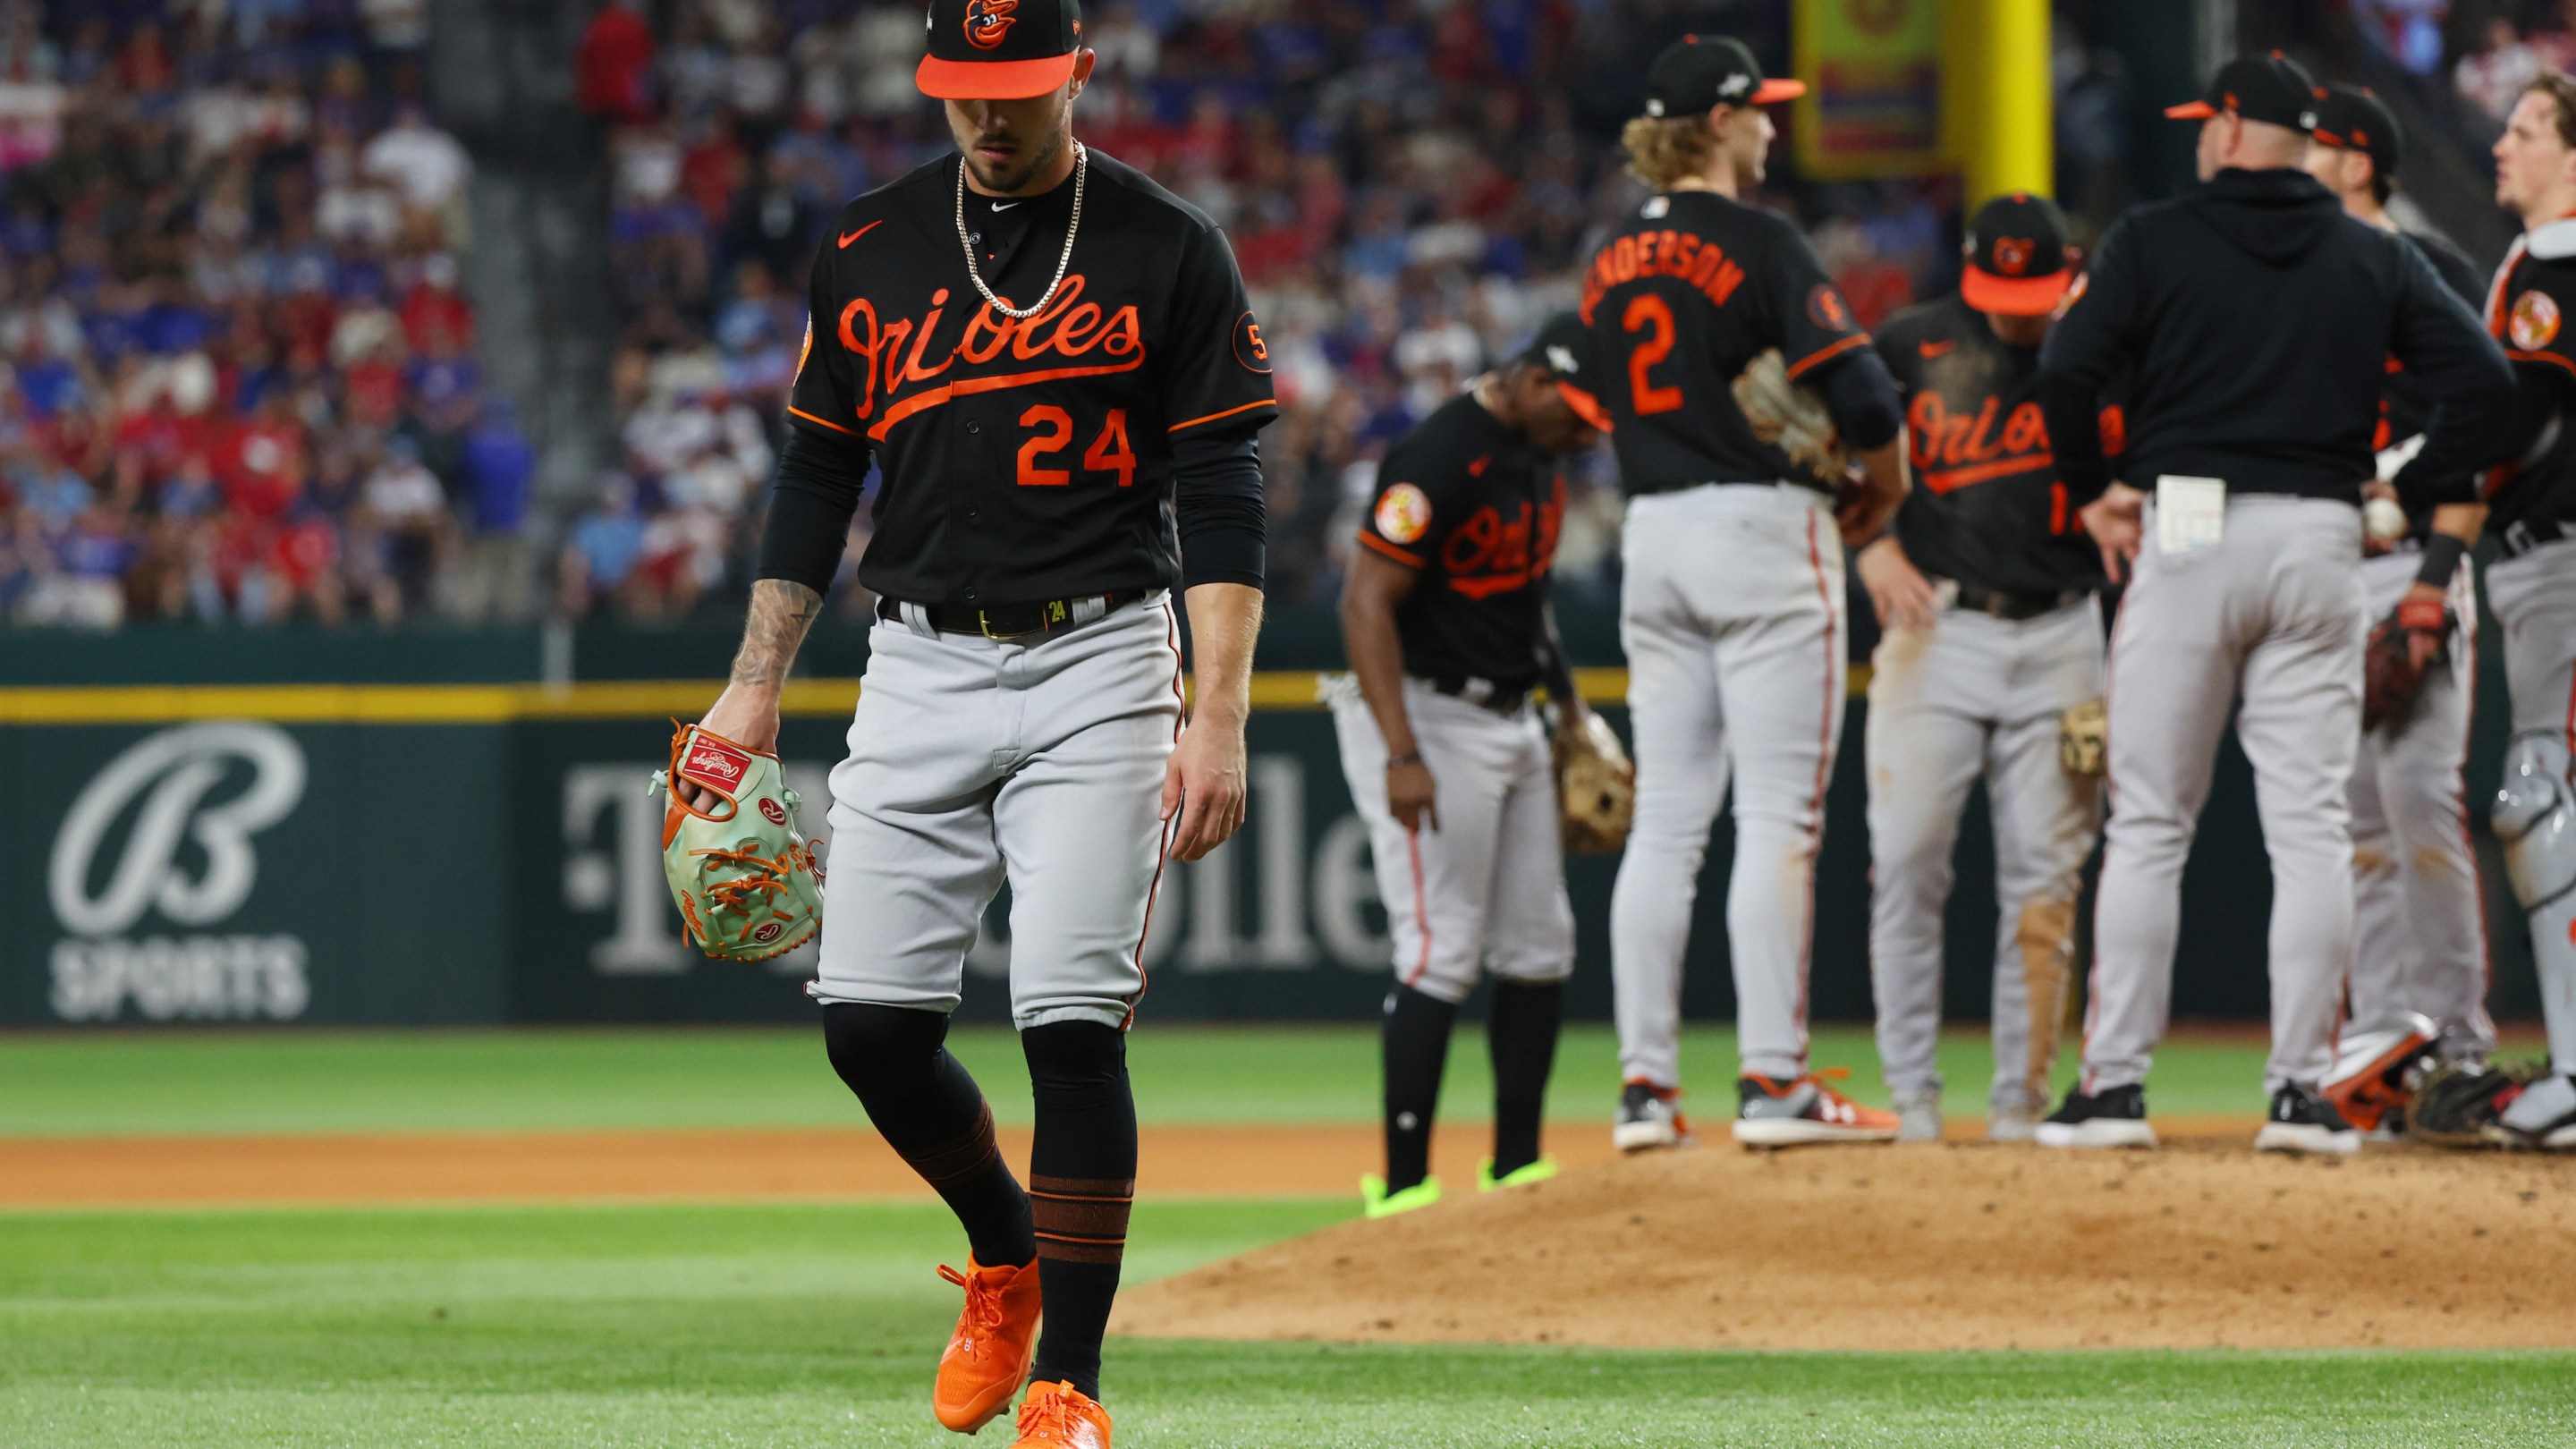 Orioles reliever DL Hall leaves the mound while his teammates wait for the reliever who will relieve him during the team's Game 3 loss in the American League Divisional Series.